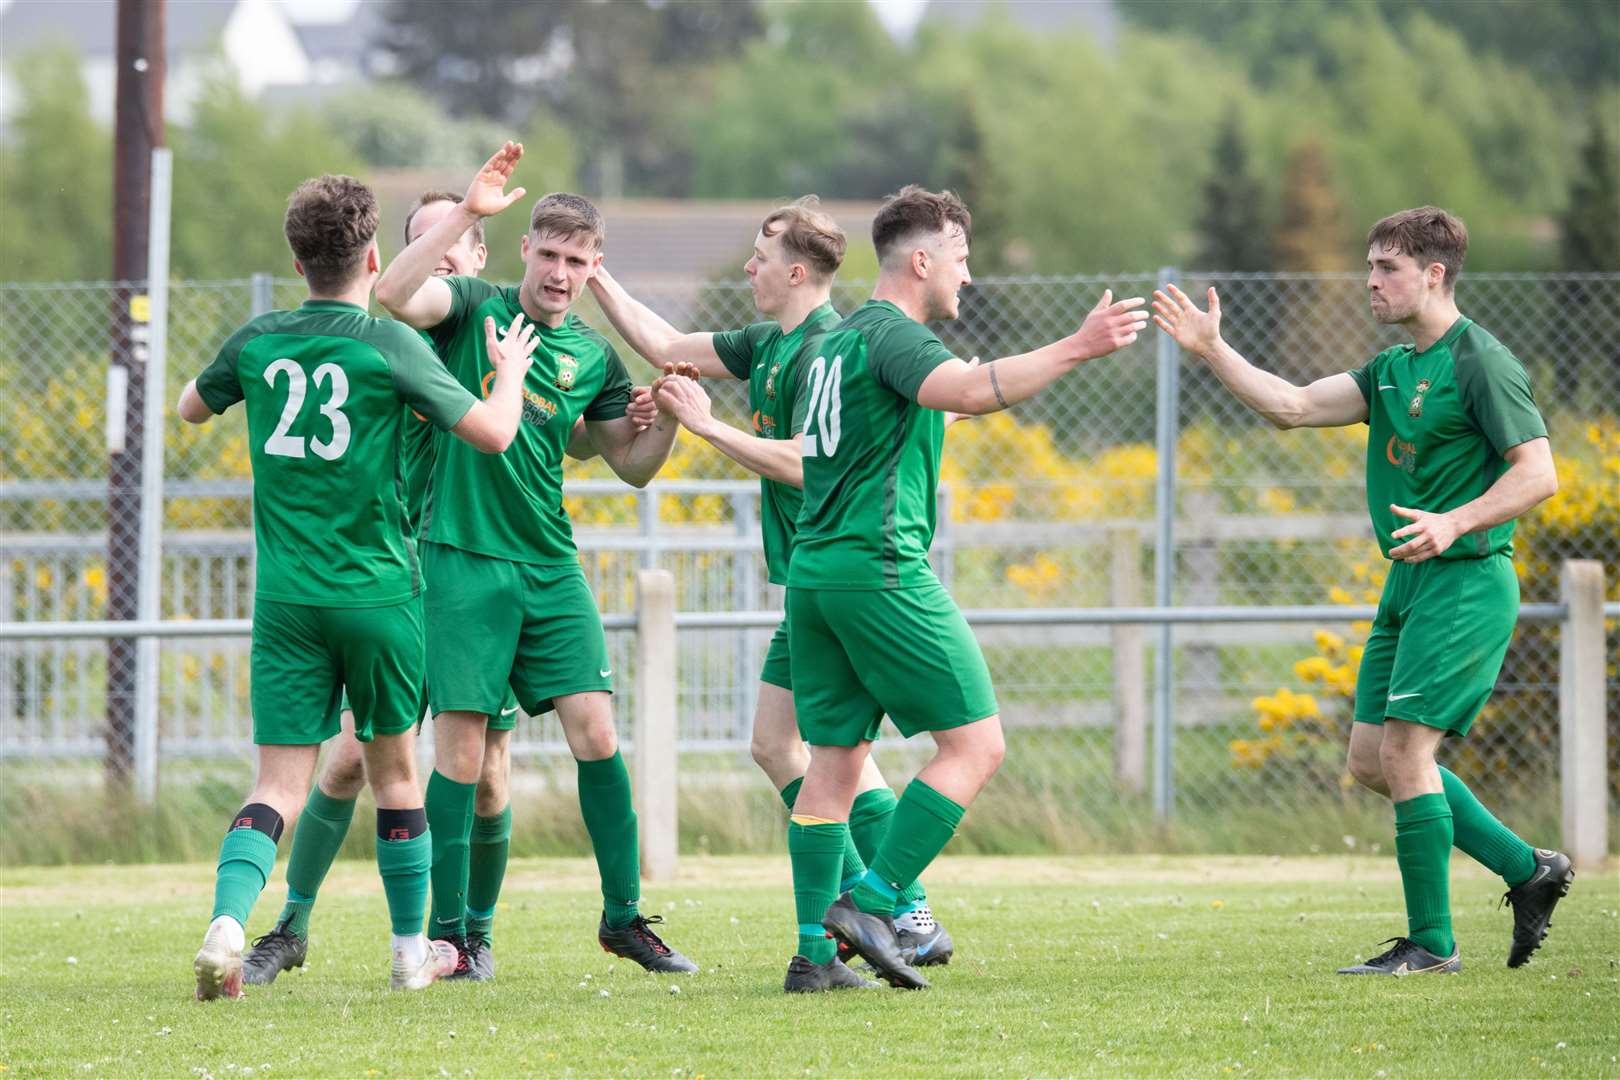 Dufftown celebrate their second half goal...Dufftown FC (2) vs Forres Thistle FC (2) - Dufftown FC win 5-3 on penalties - Elginshire Cup Final held at Logie Park, Forres 14/05/2022...Picture: Daniel Forsyth..